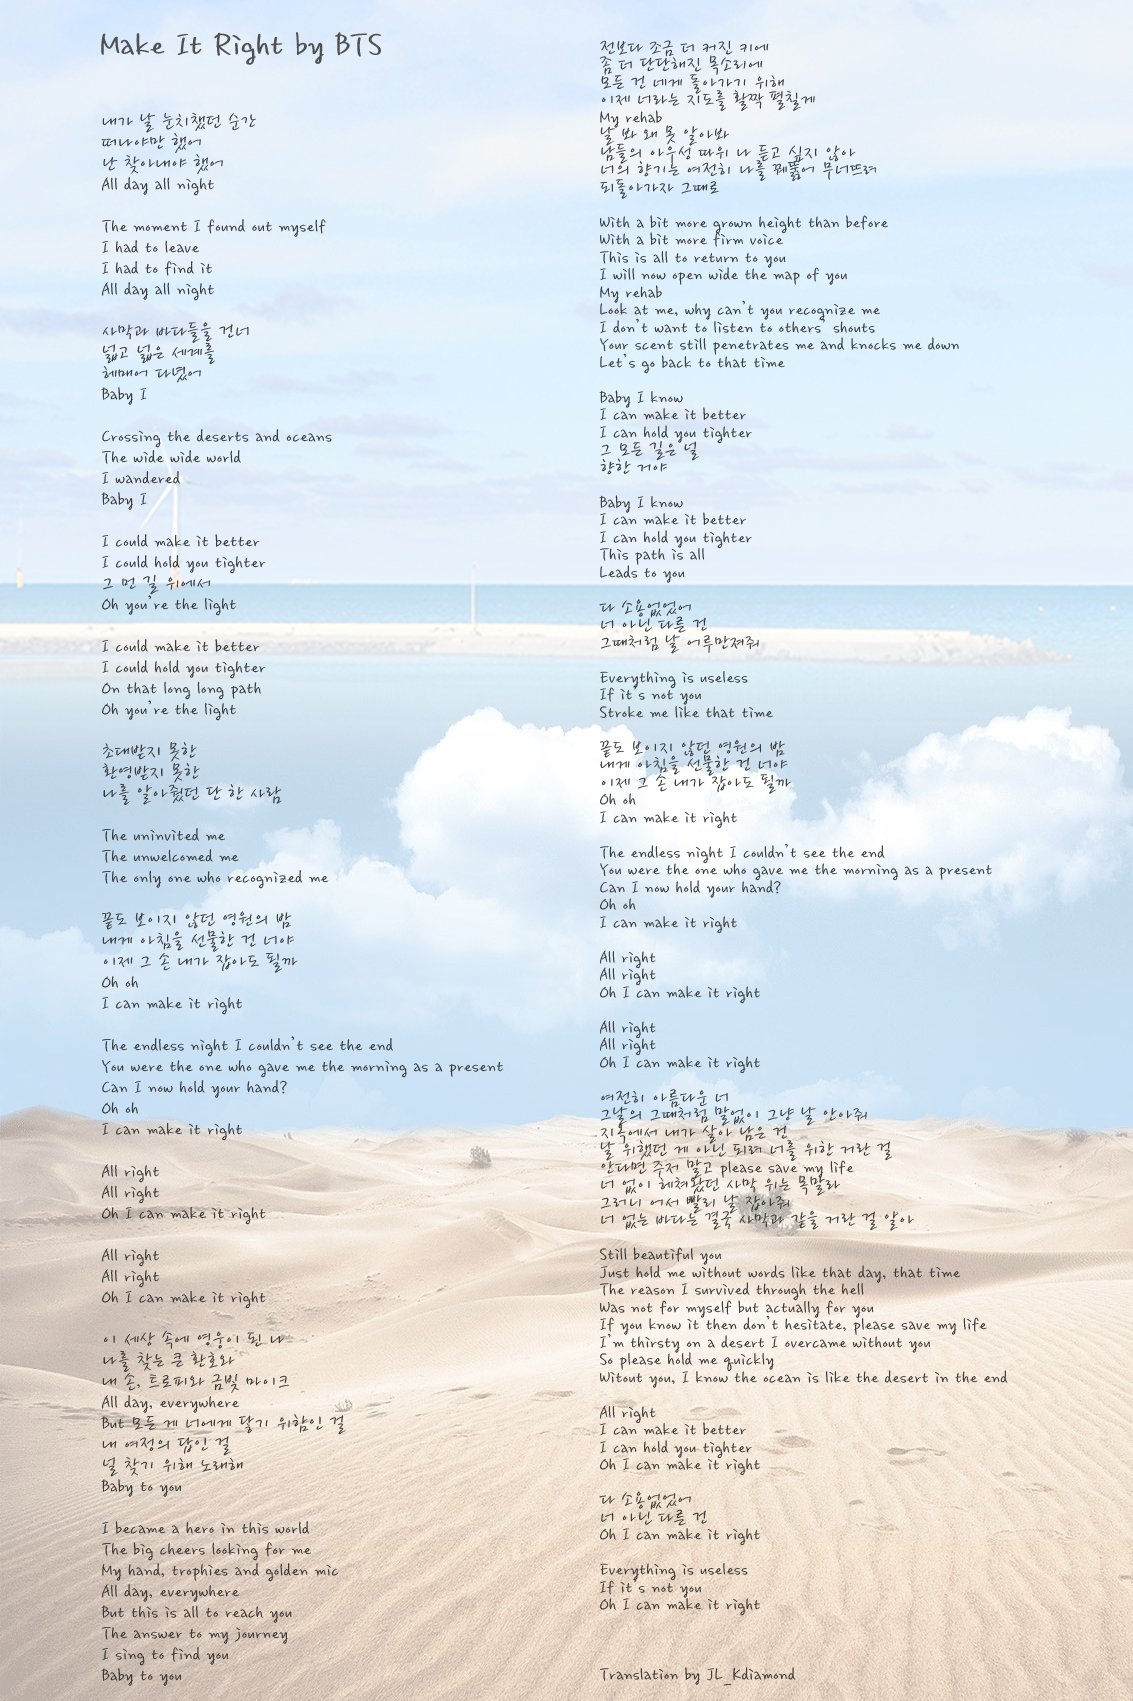 Jayelle Kdiamond English Lyrics Translation Make It Right By Bts All Their Lyrics Are Poetry Re Upload Missed Some Part Makeitright Map Of The Soul Persona 방탄소년단 Bts Bts Twt T Co 0rzcay9cpx